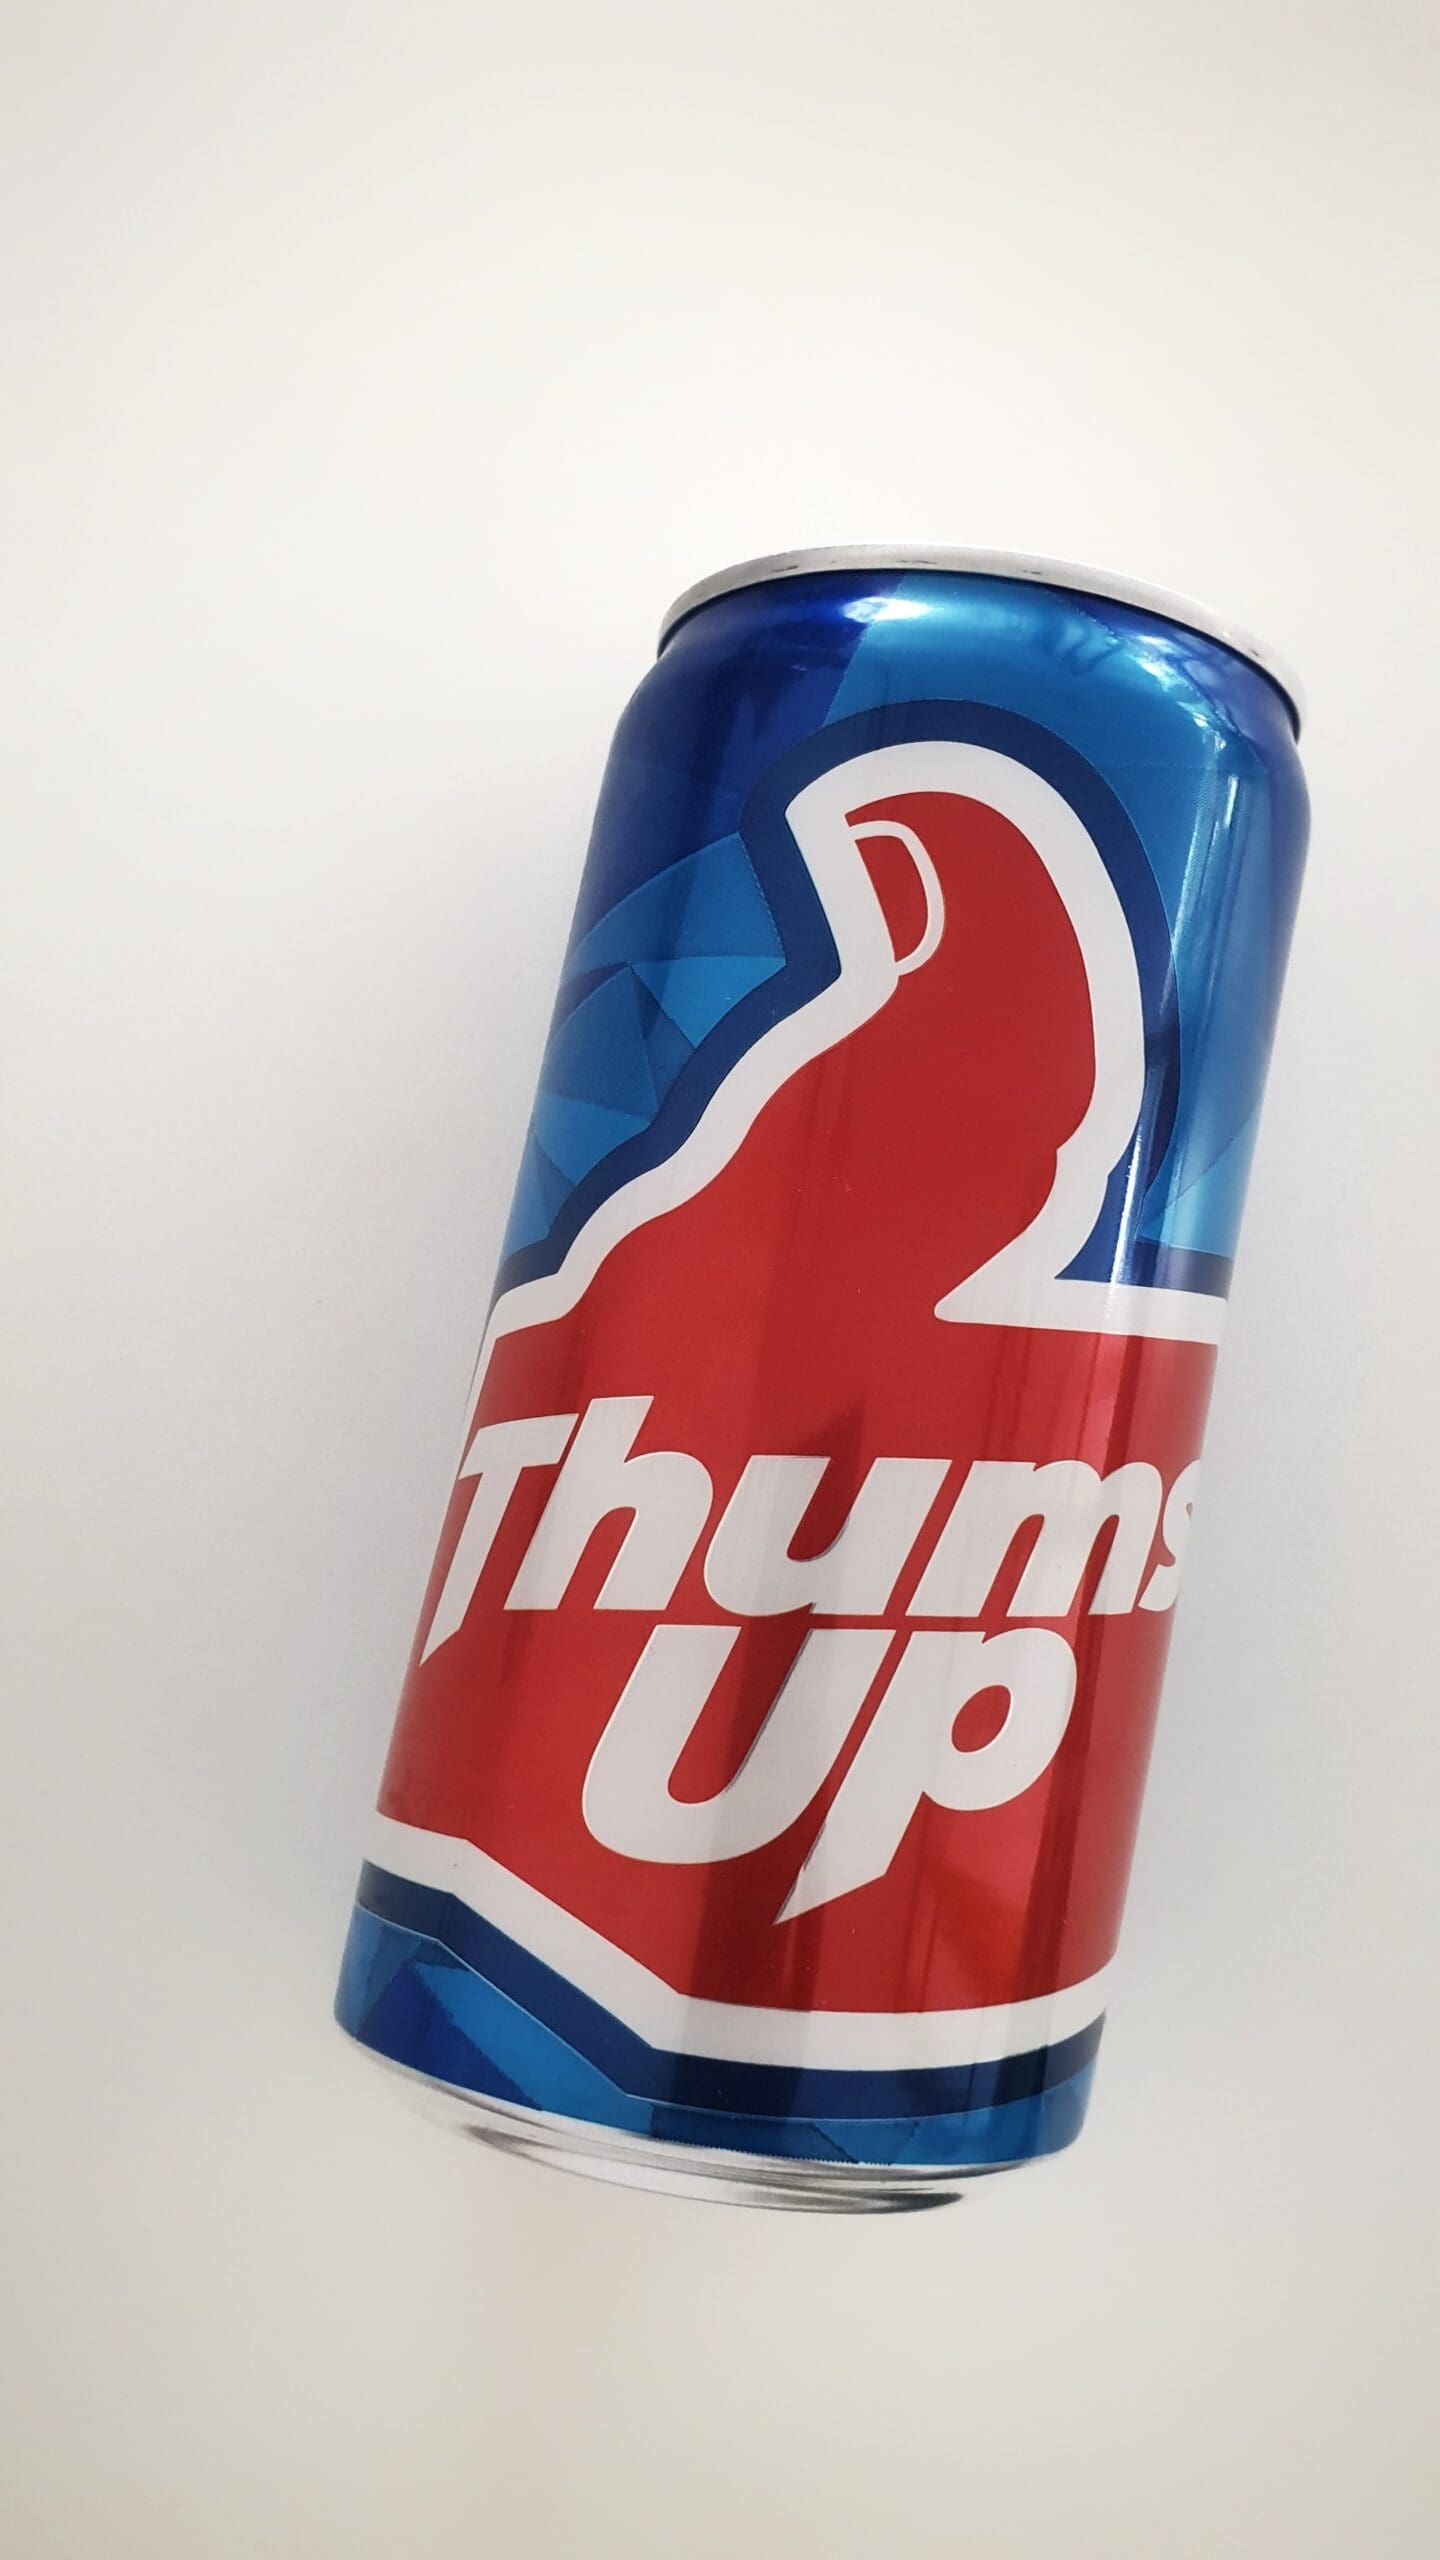 A soda can with a thumbs-up logo representing customer retention.